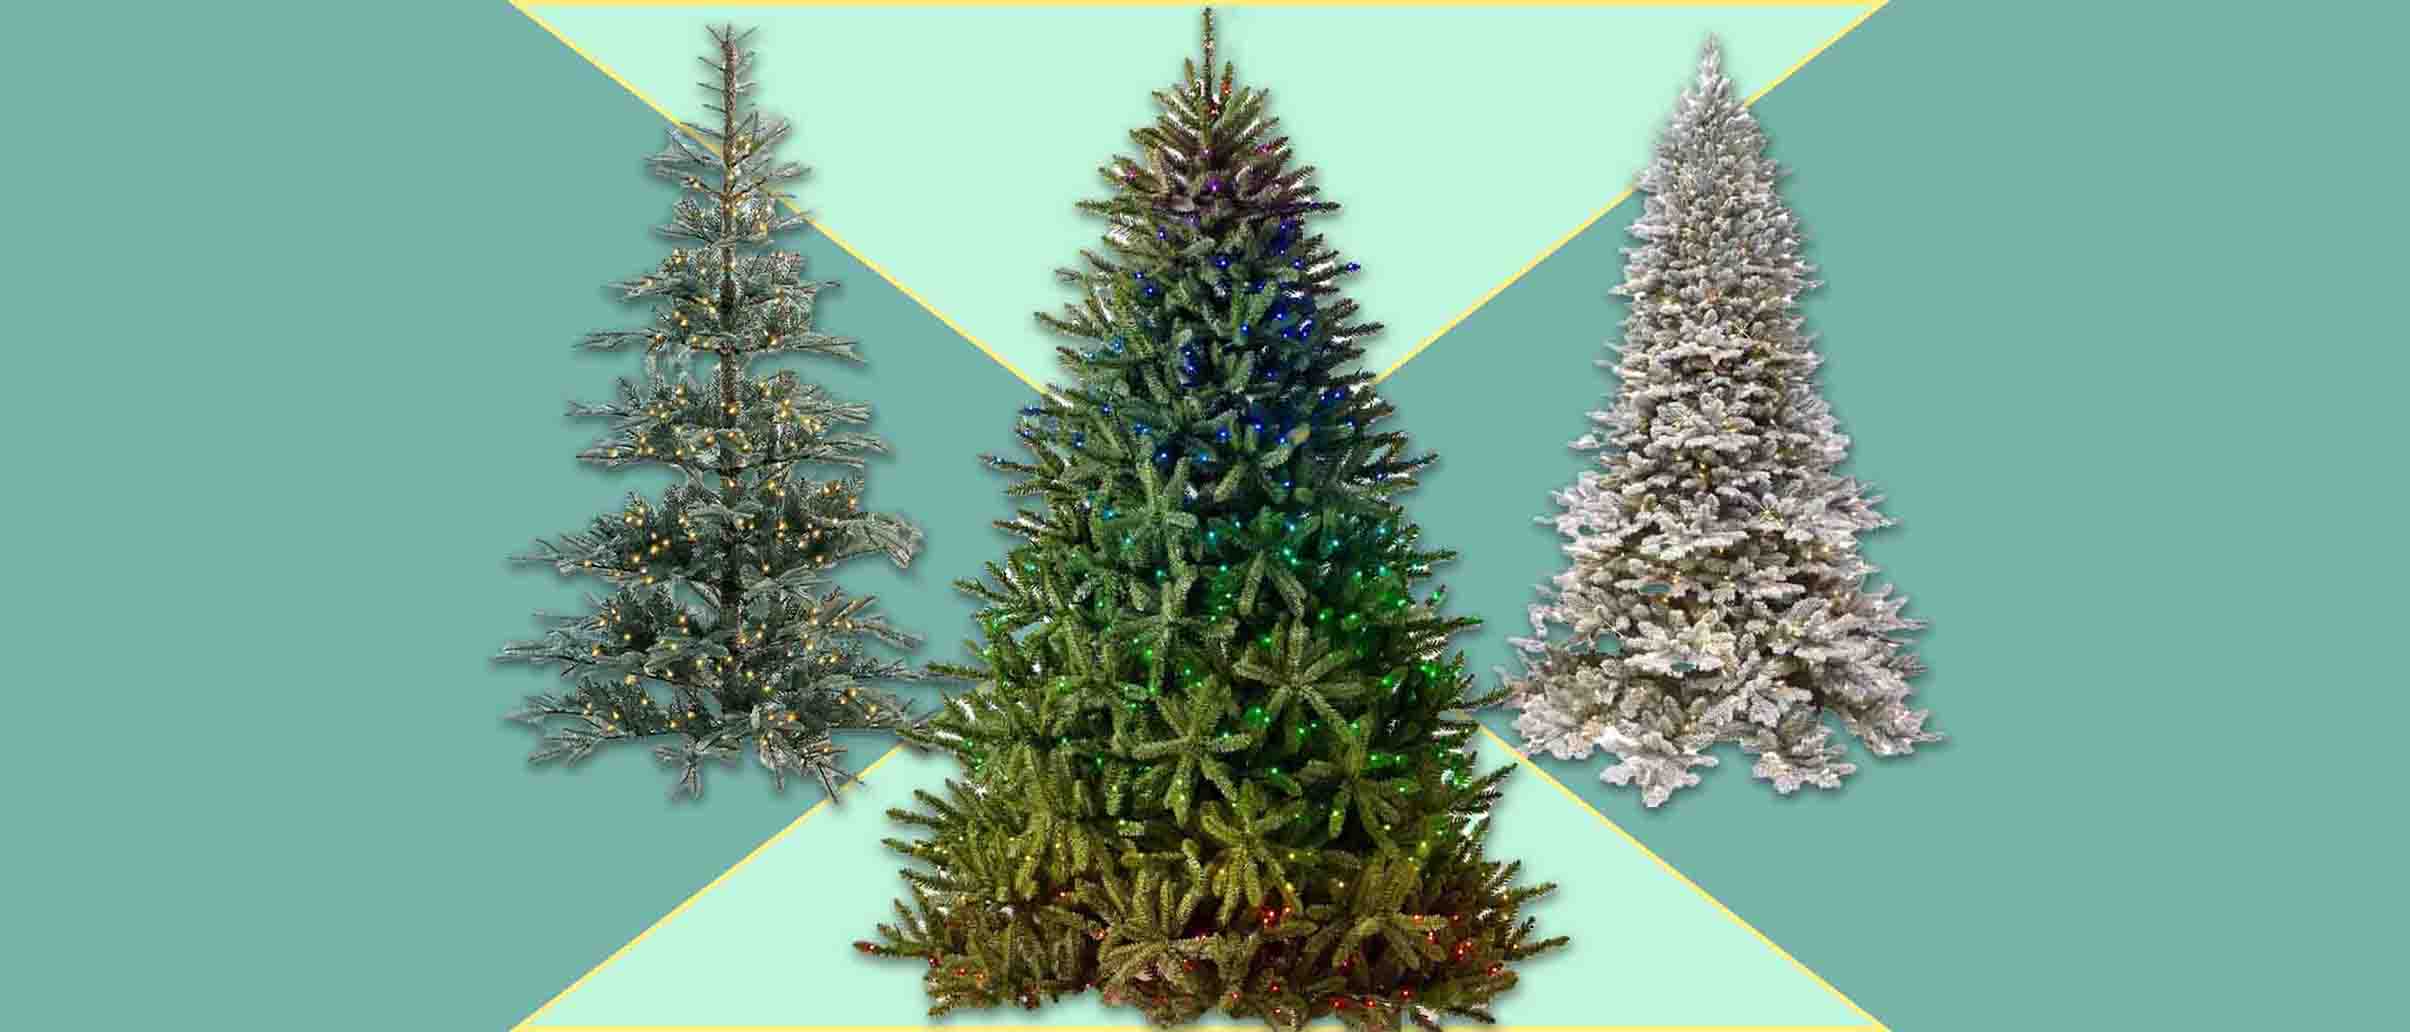 three of the best artificial Christmas trees of the year including a full shape, white tree and pre-strung tree